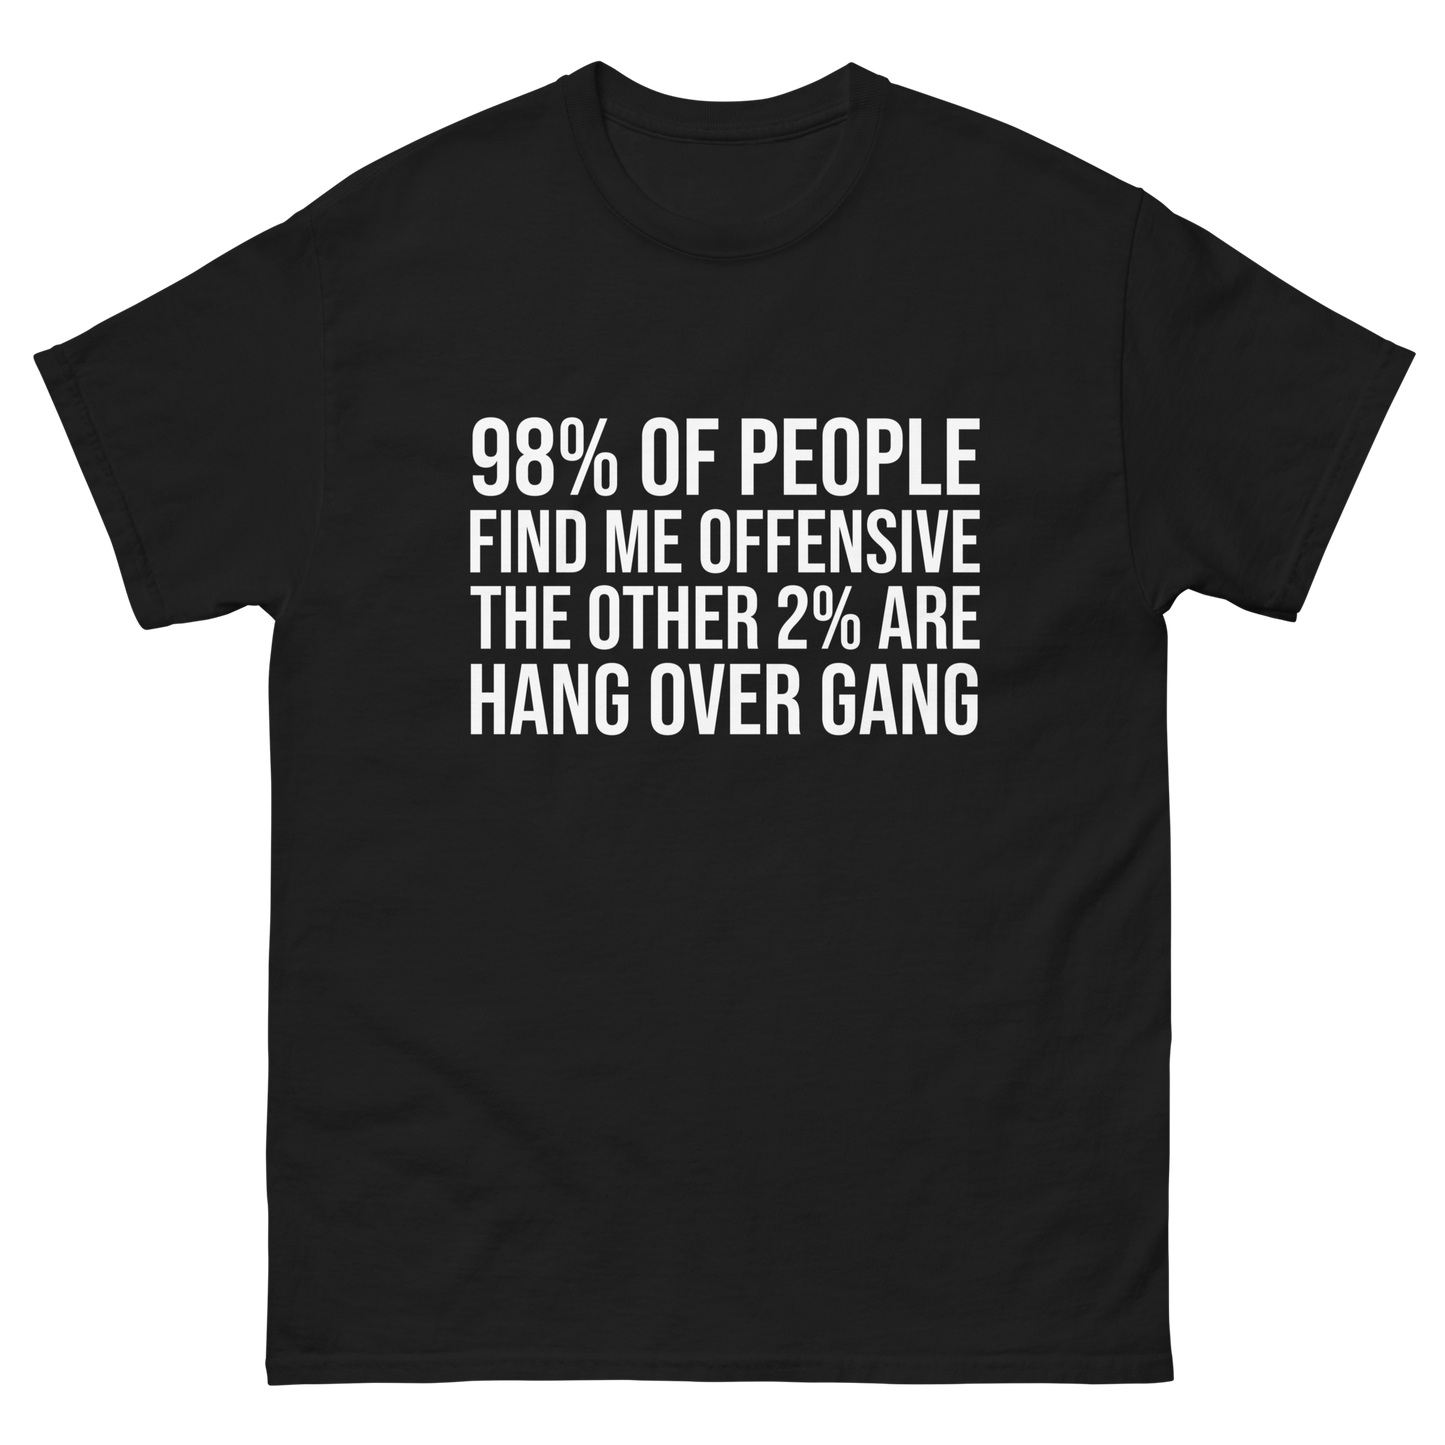 "98% of People Find Me Offensive" T-Shirt